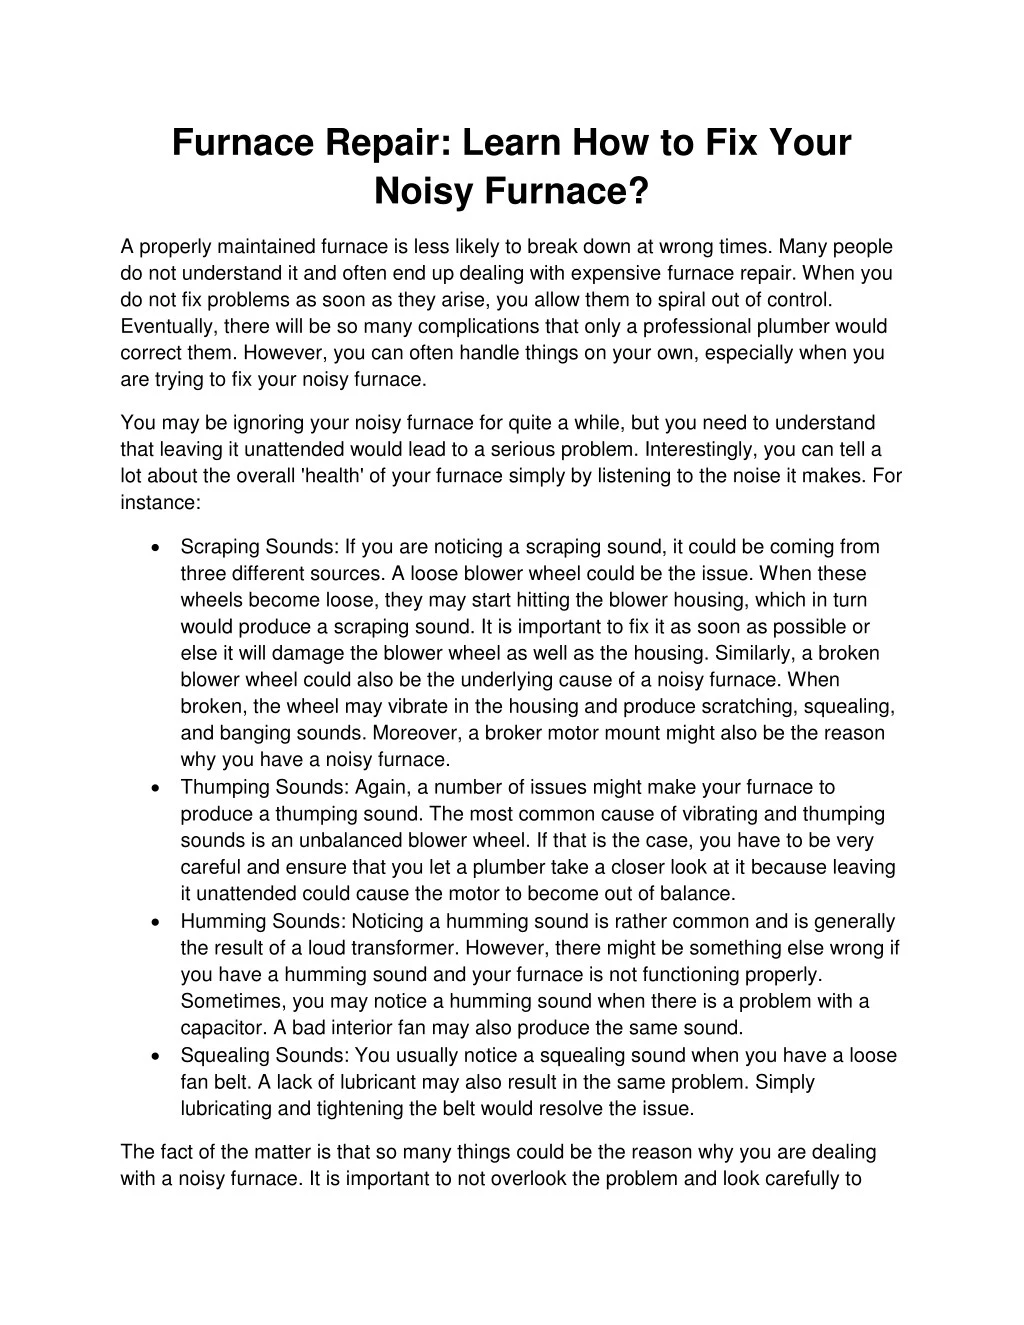 furnace repair learn how to fix your noisy furnace